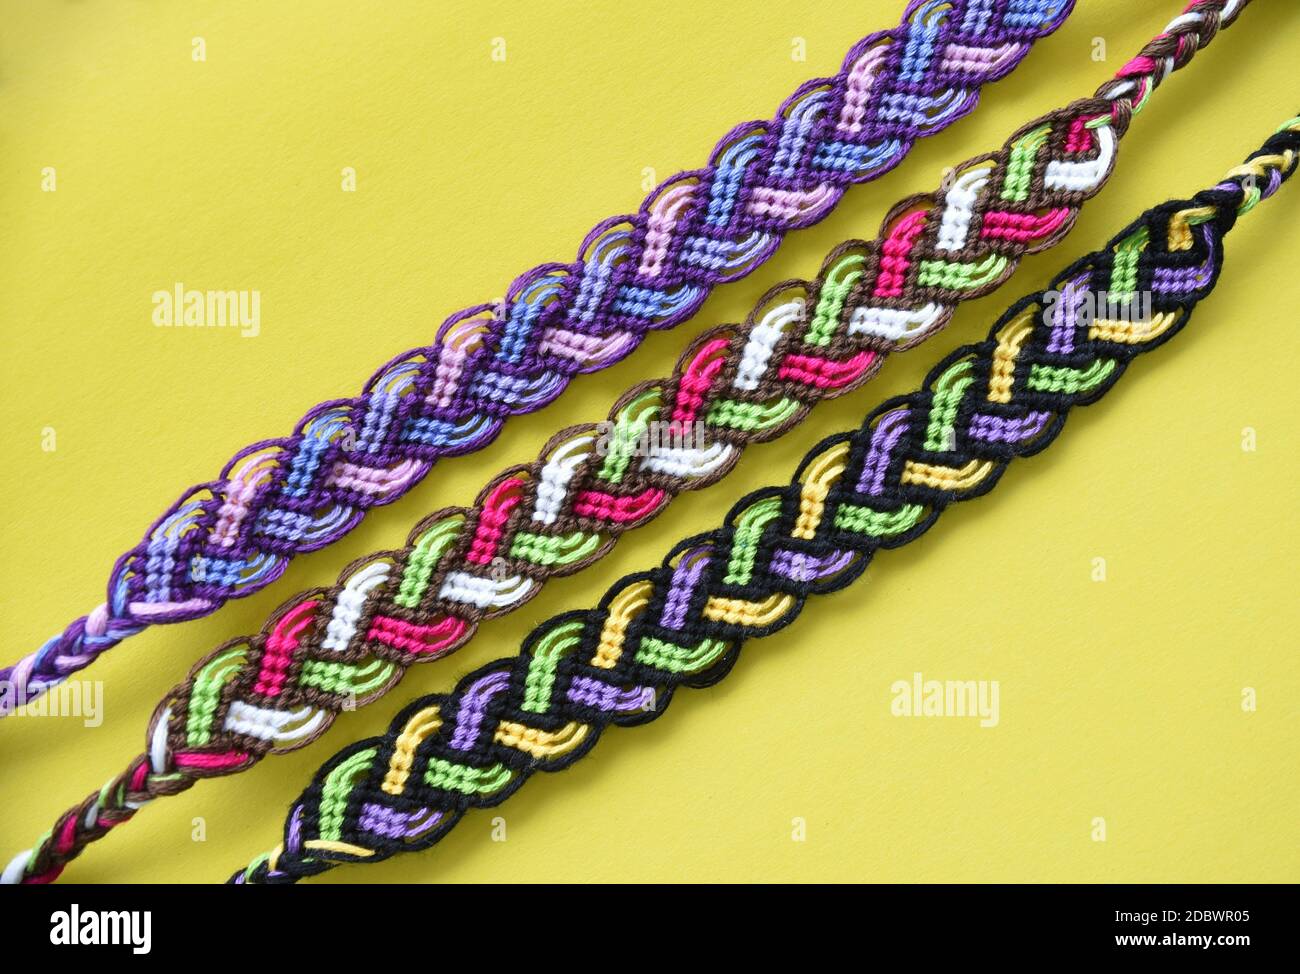 Selective focus of multi-colored woven DIY friendship bracelets Pigtail handmade of embroidery bright thread with knots on yellow background Stock Photo